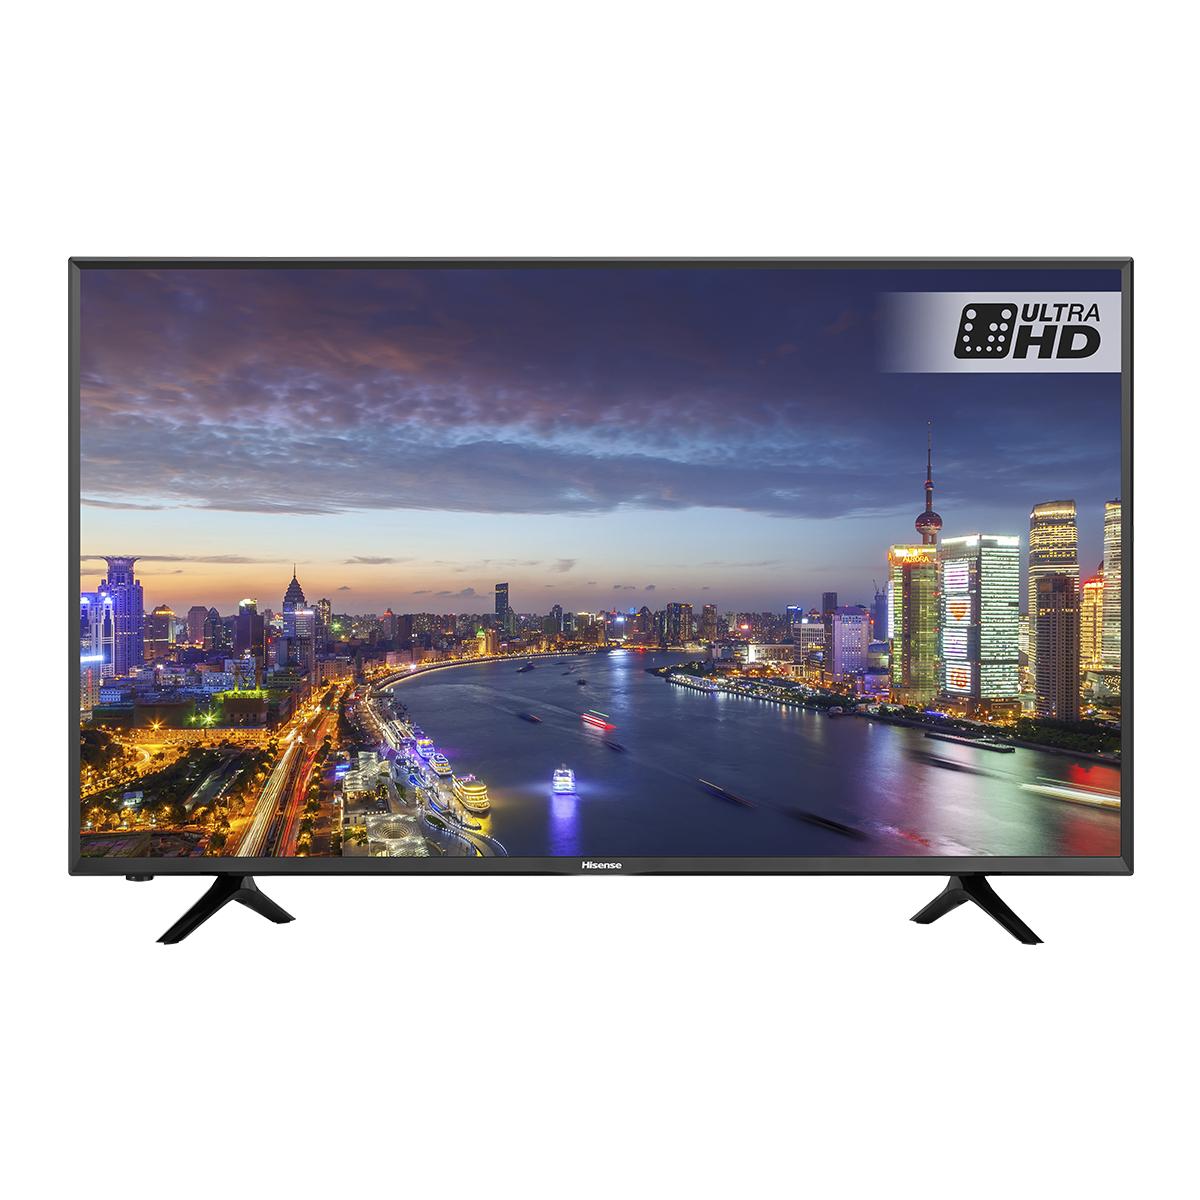 Up to 6 months to pay on selected TVs when you spend £99 or more.